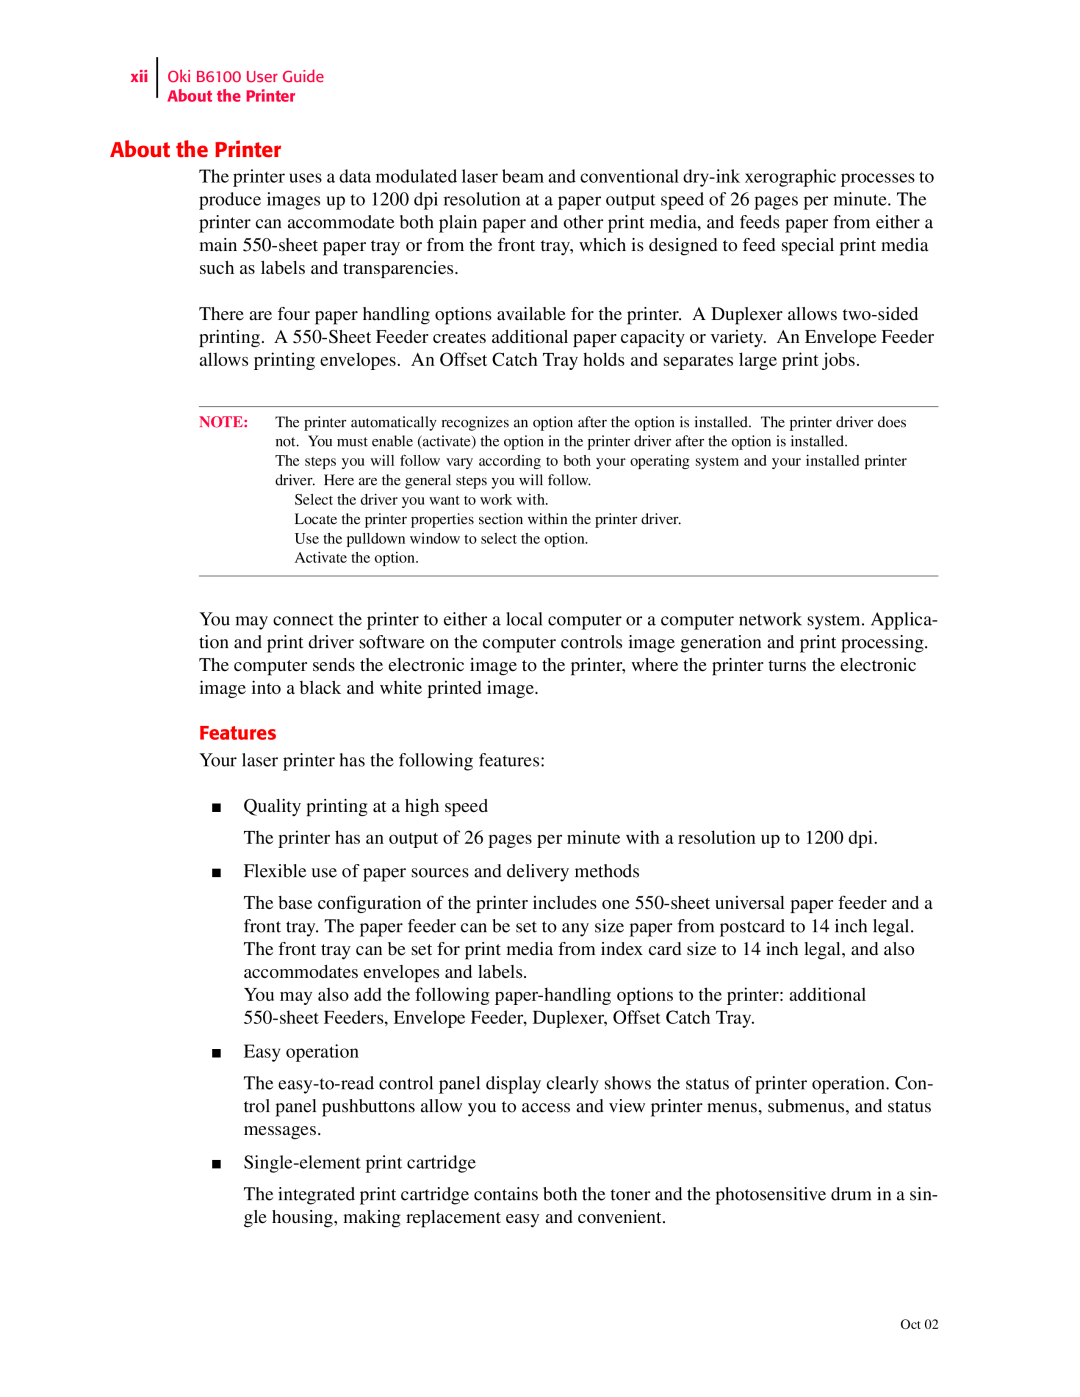 Oki 6100 manual About the Printer, Features 